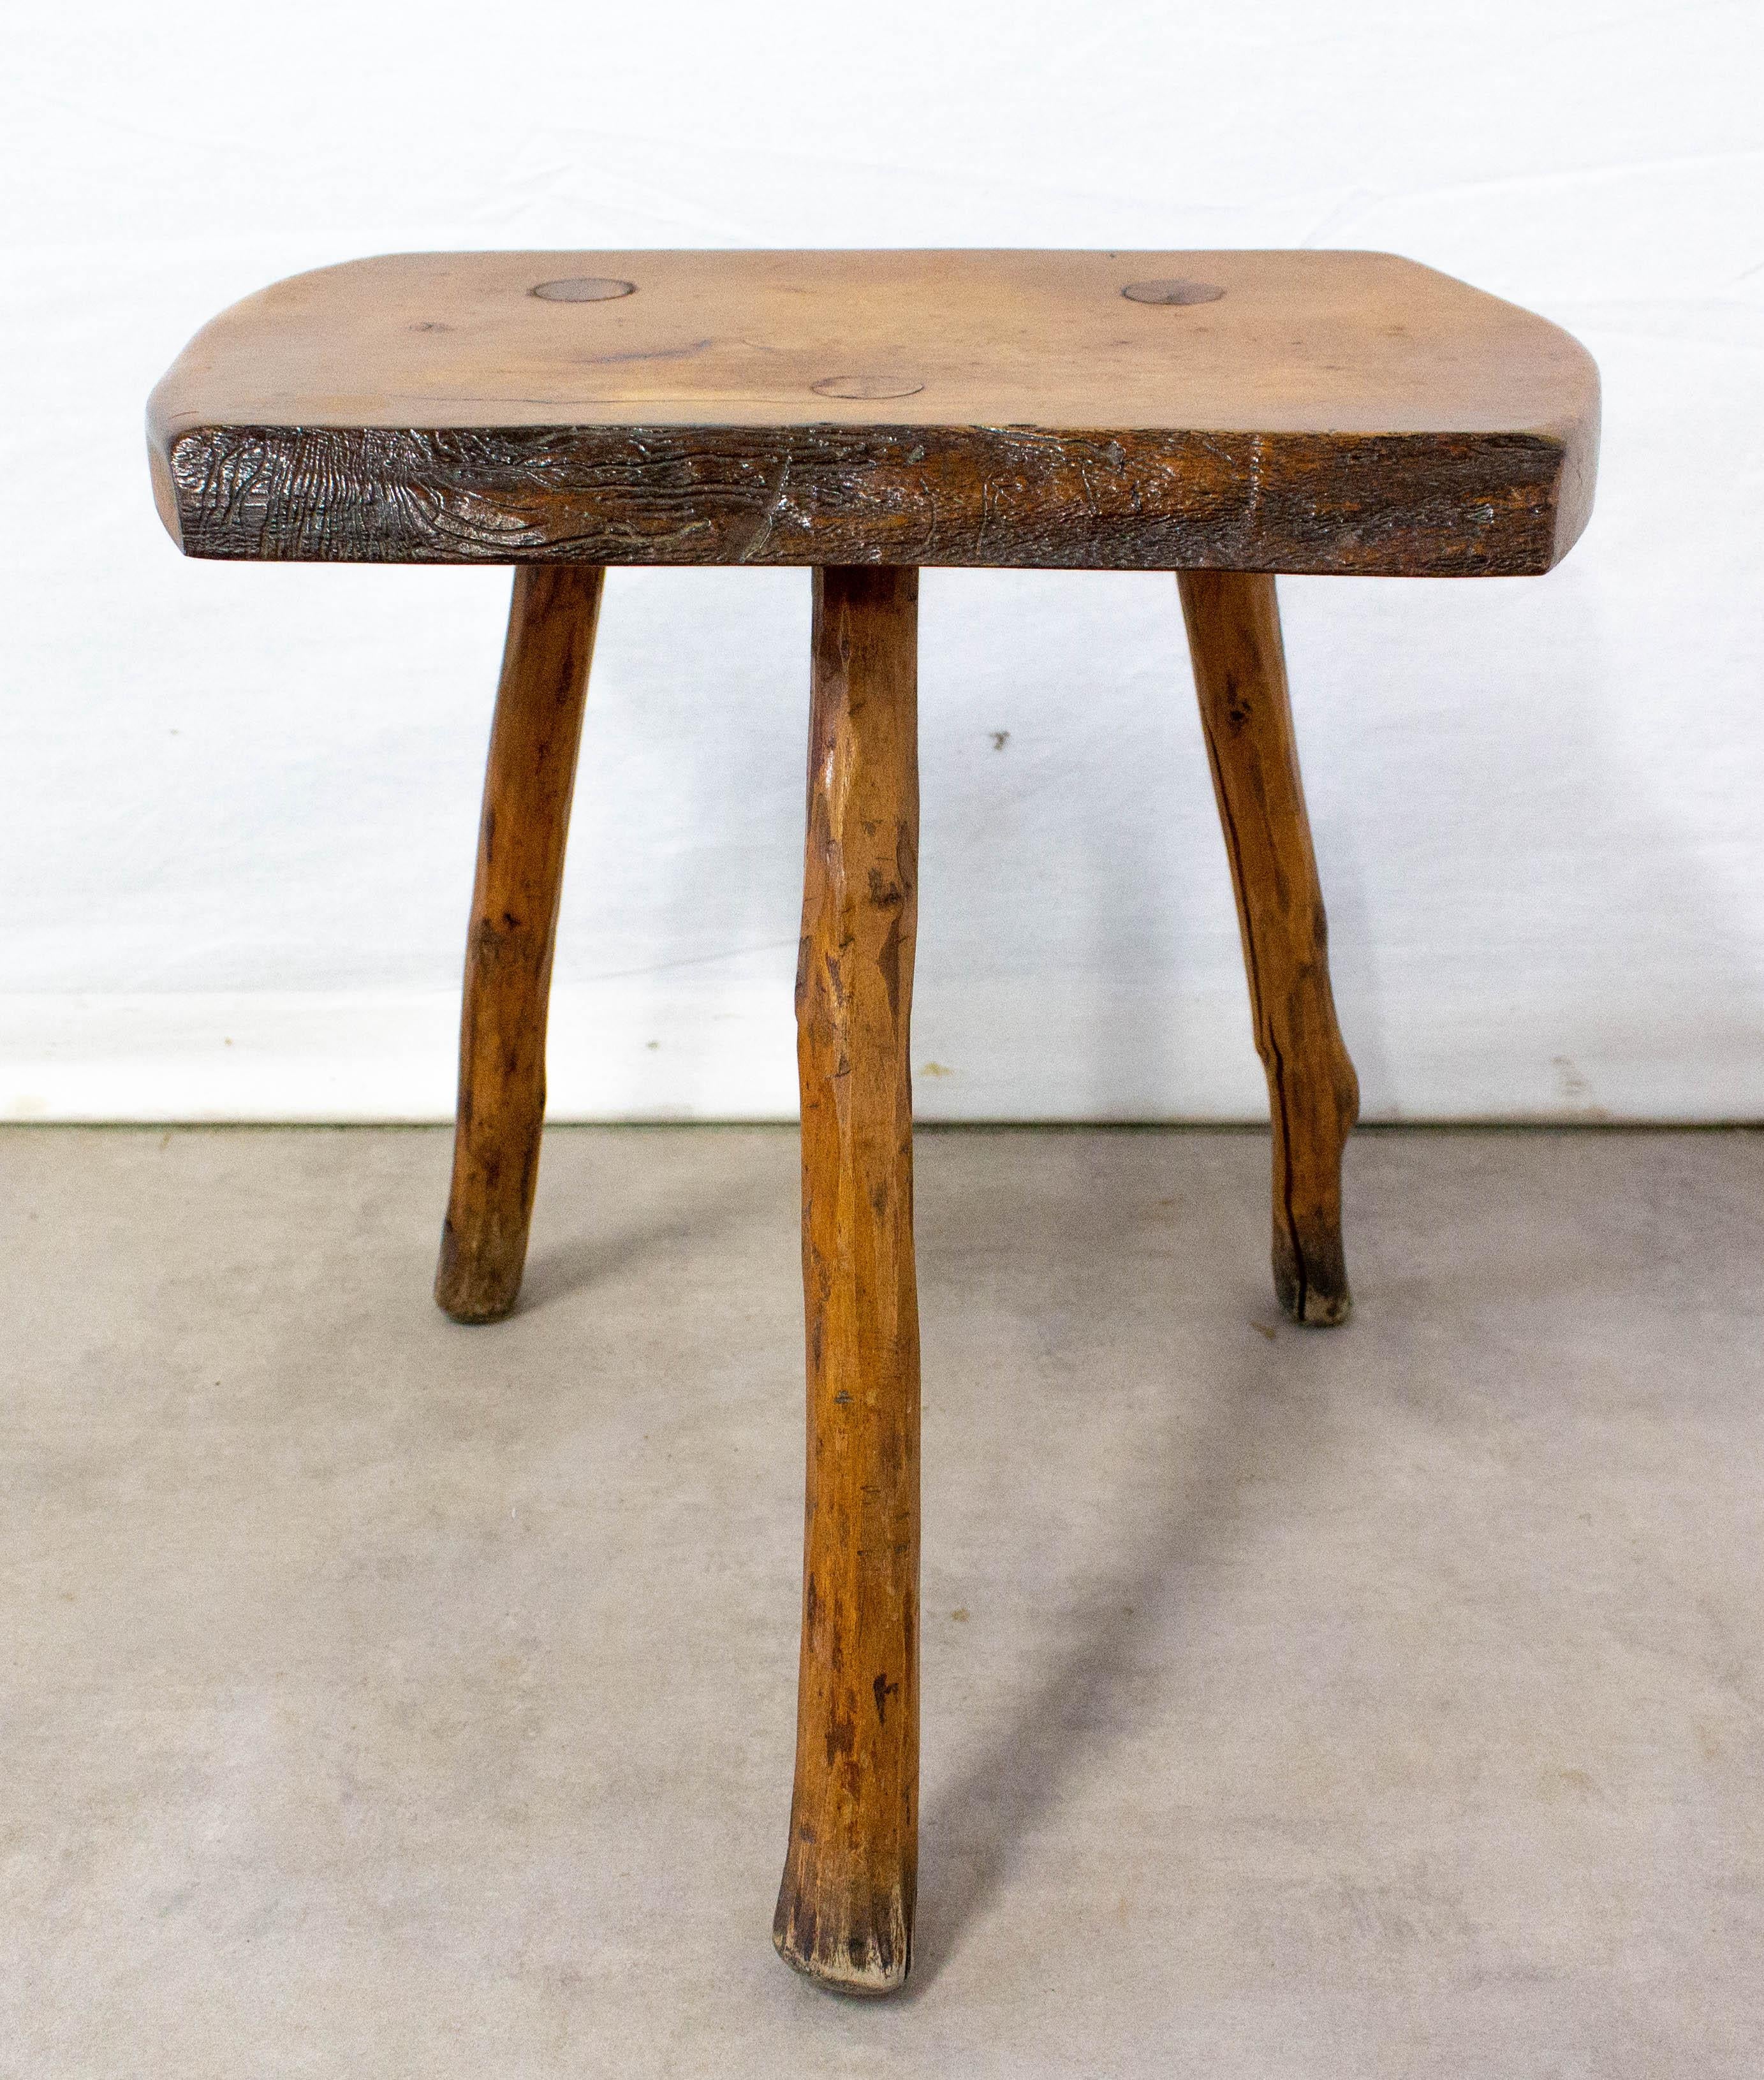 Three legs milking stool Brutalist style 1960 France
Alder
Name of the maker: F. Guyot engraved in the wood
Very good condition

For shipping: 42 x 42 x 43 cm 3 kg.